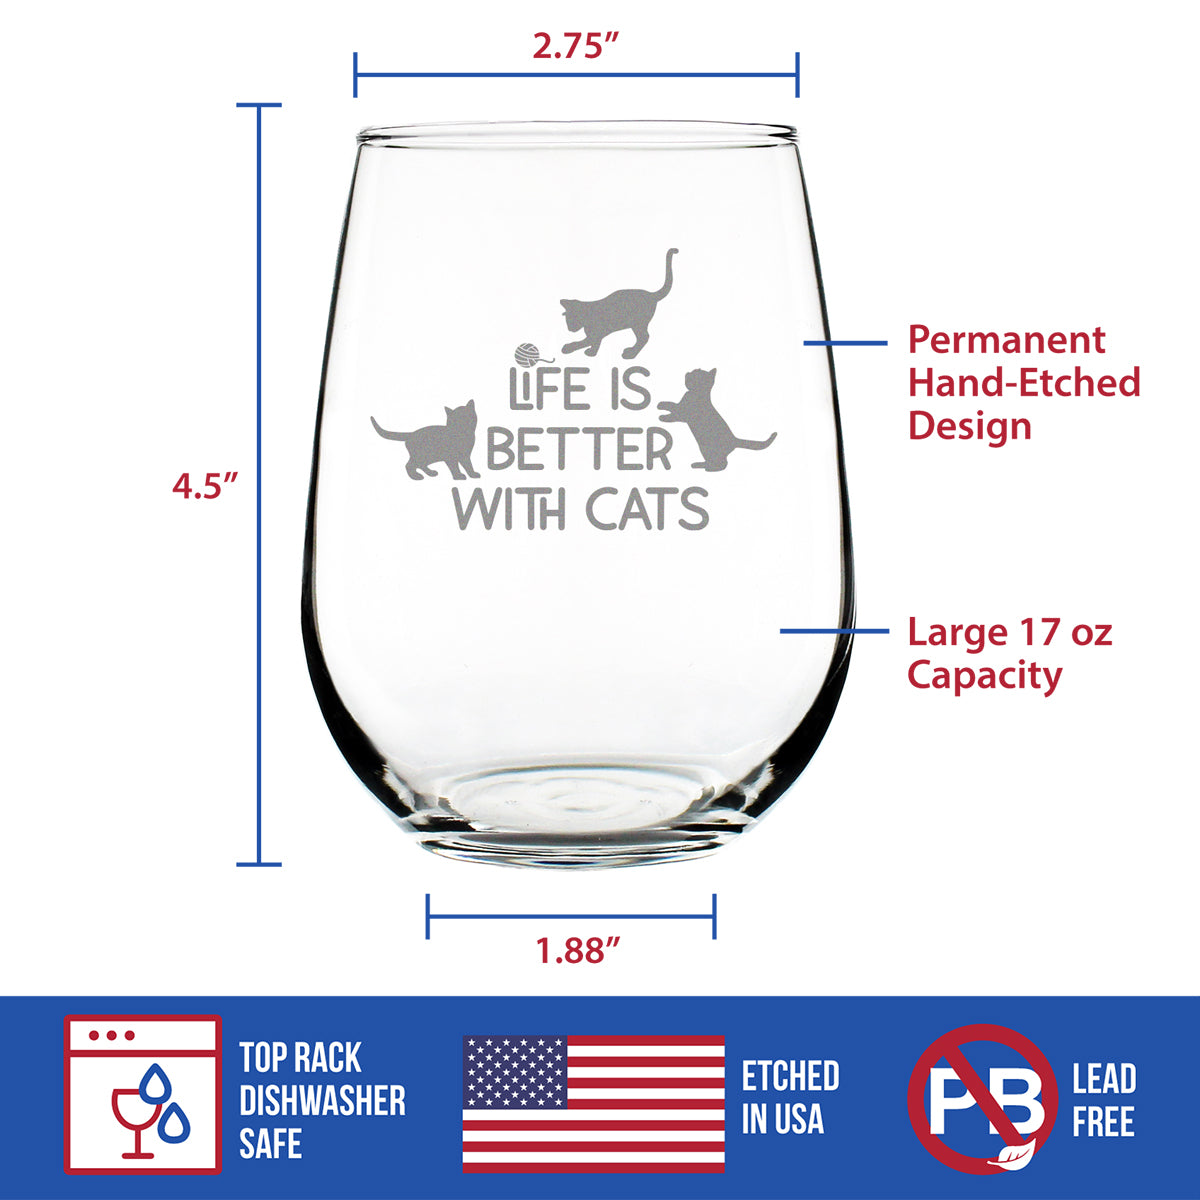 Life is Better With Cats - Stemless Wine Glass - Funny Kitten Themed Gifts for Cat Lovers - Large 17 Oz Glasses